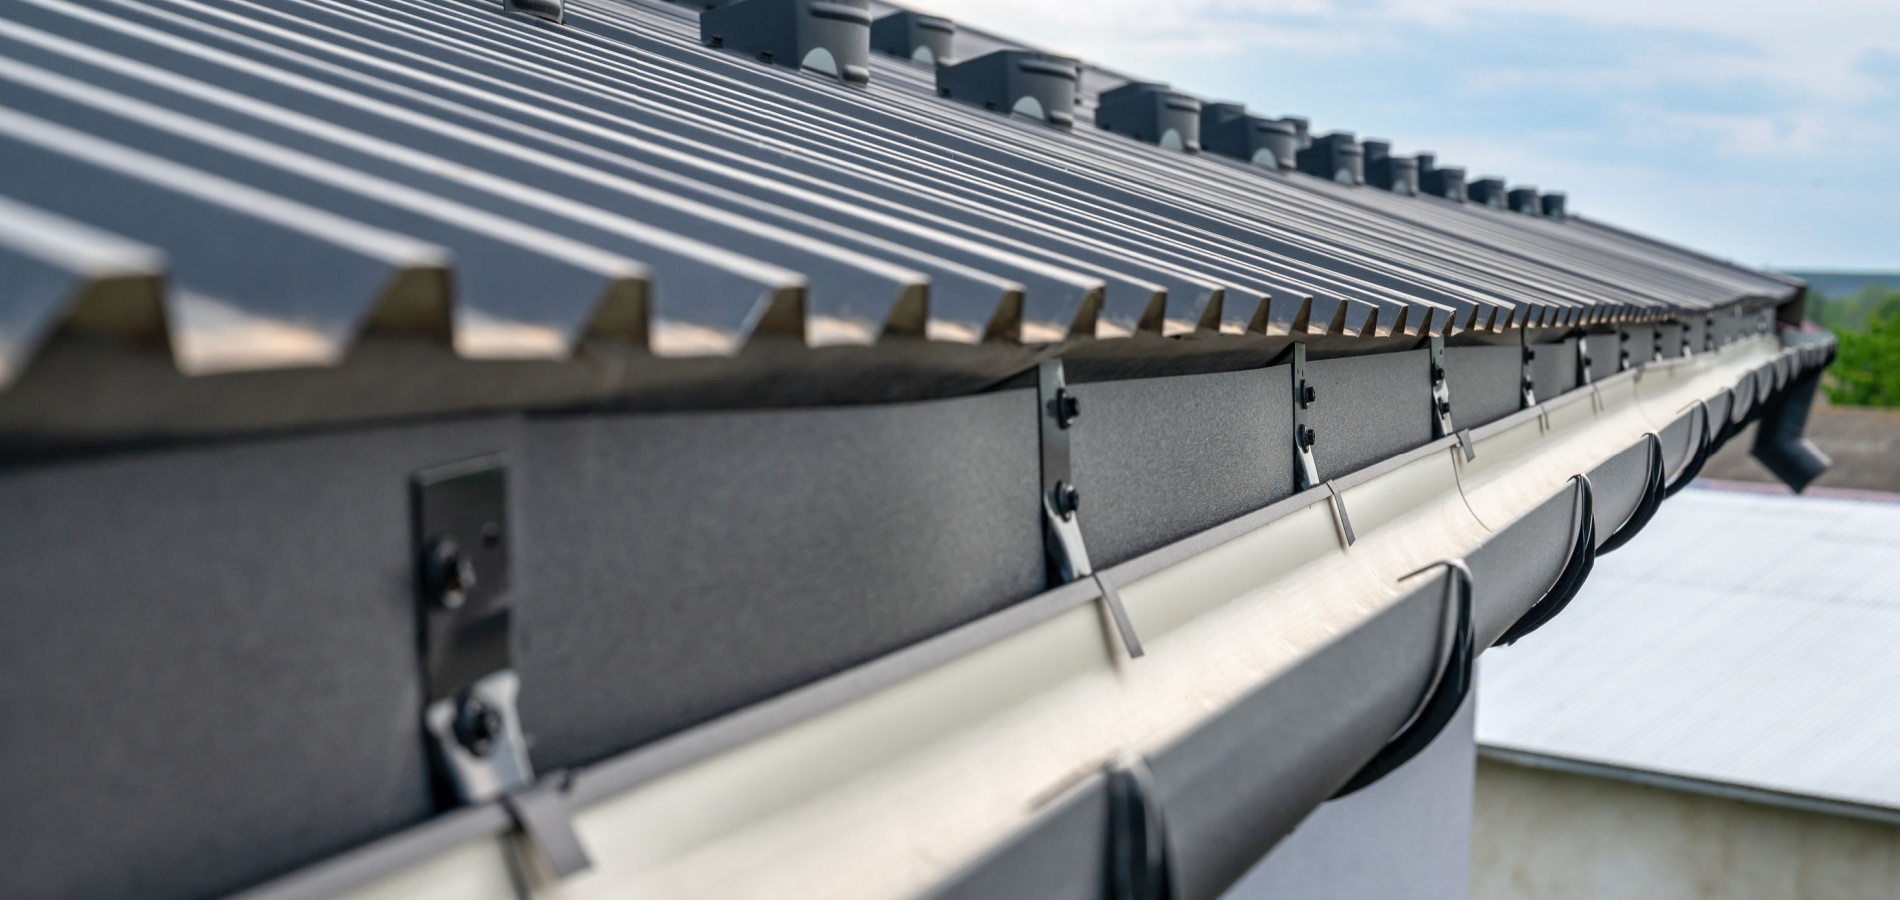 Perspective view of a metal roof with a rain gutter system, showing the texture and pattern of the metal roof panels and the secure mounting of the gutter to the building's fascia.